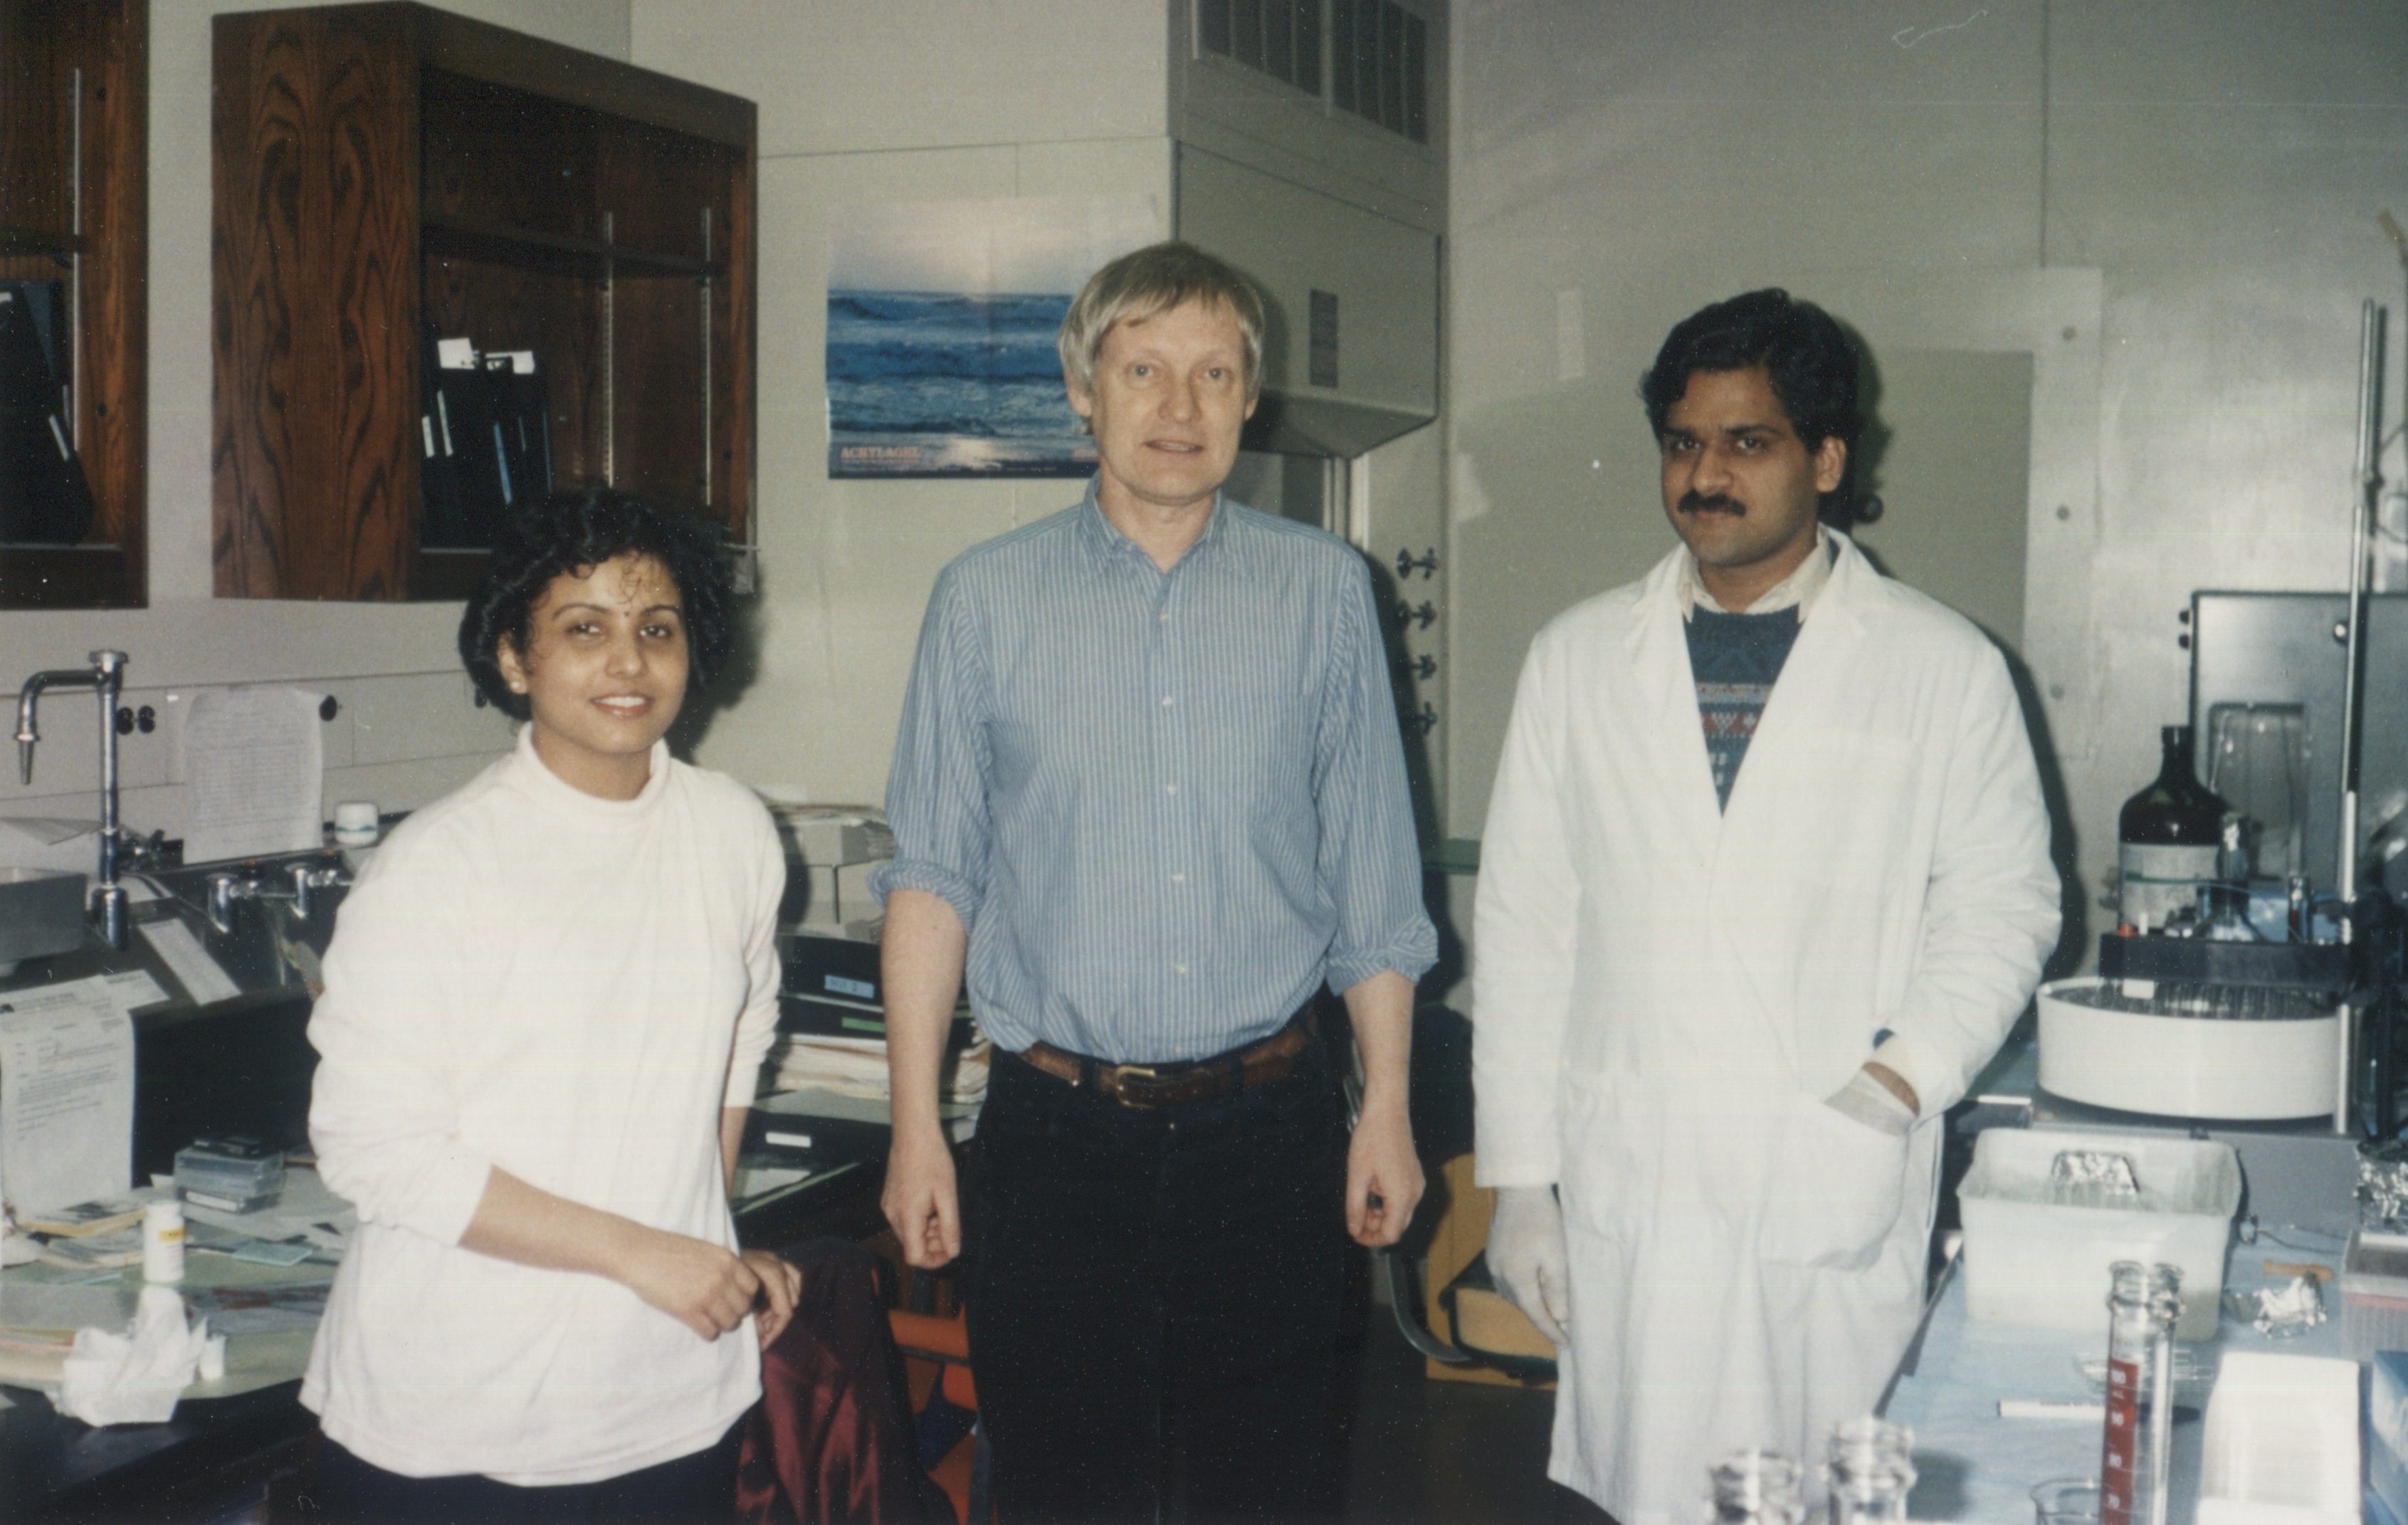 Dr. Frank at Wadsworth Center in 1995.